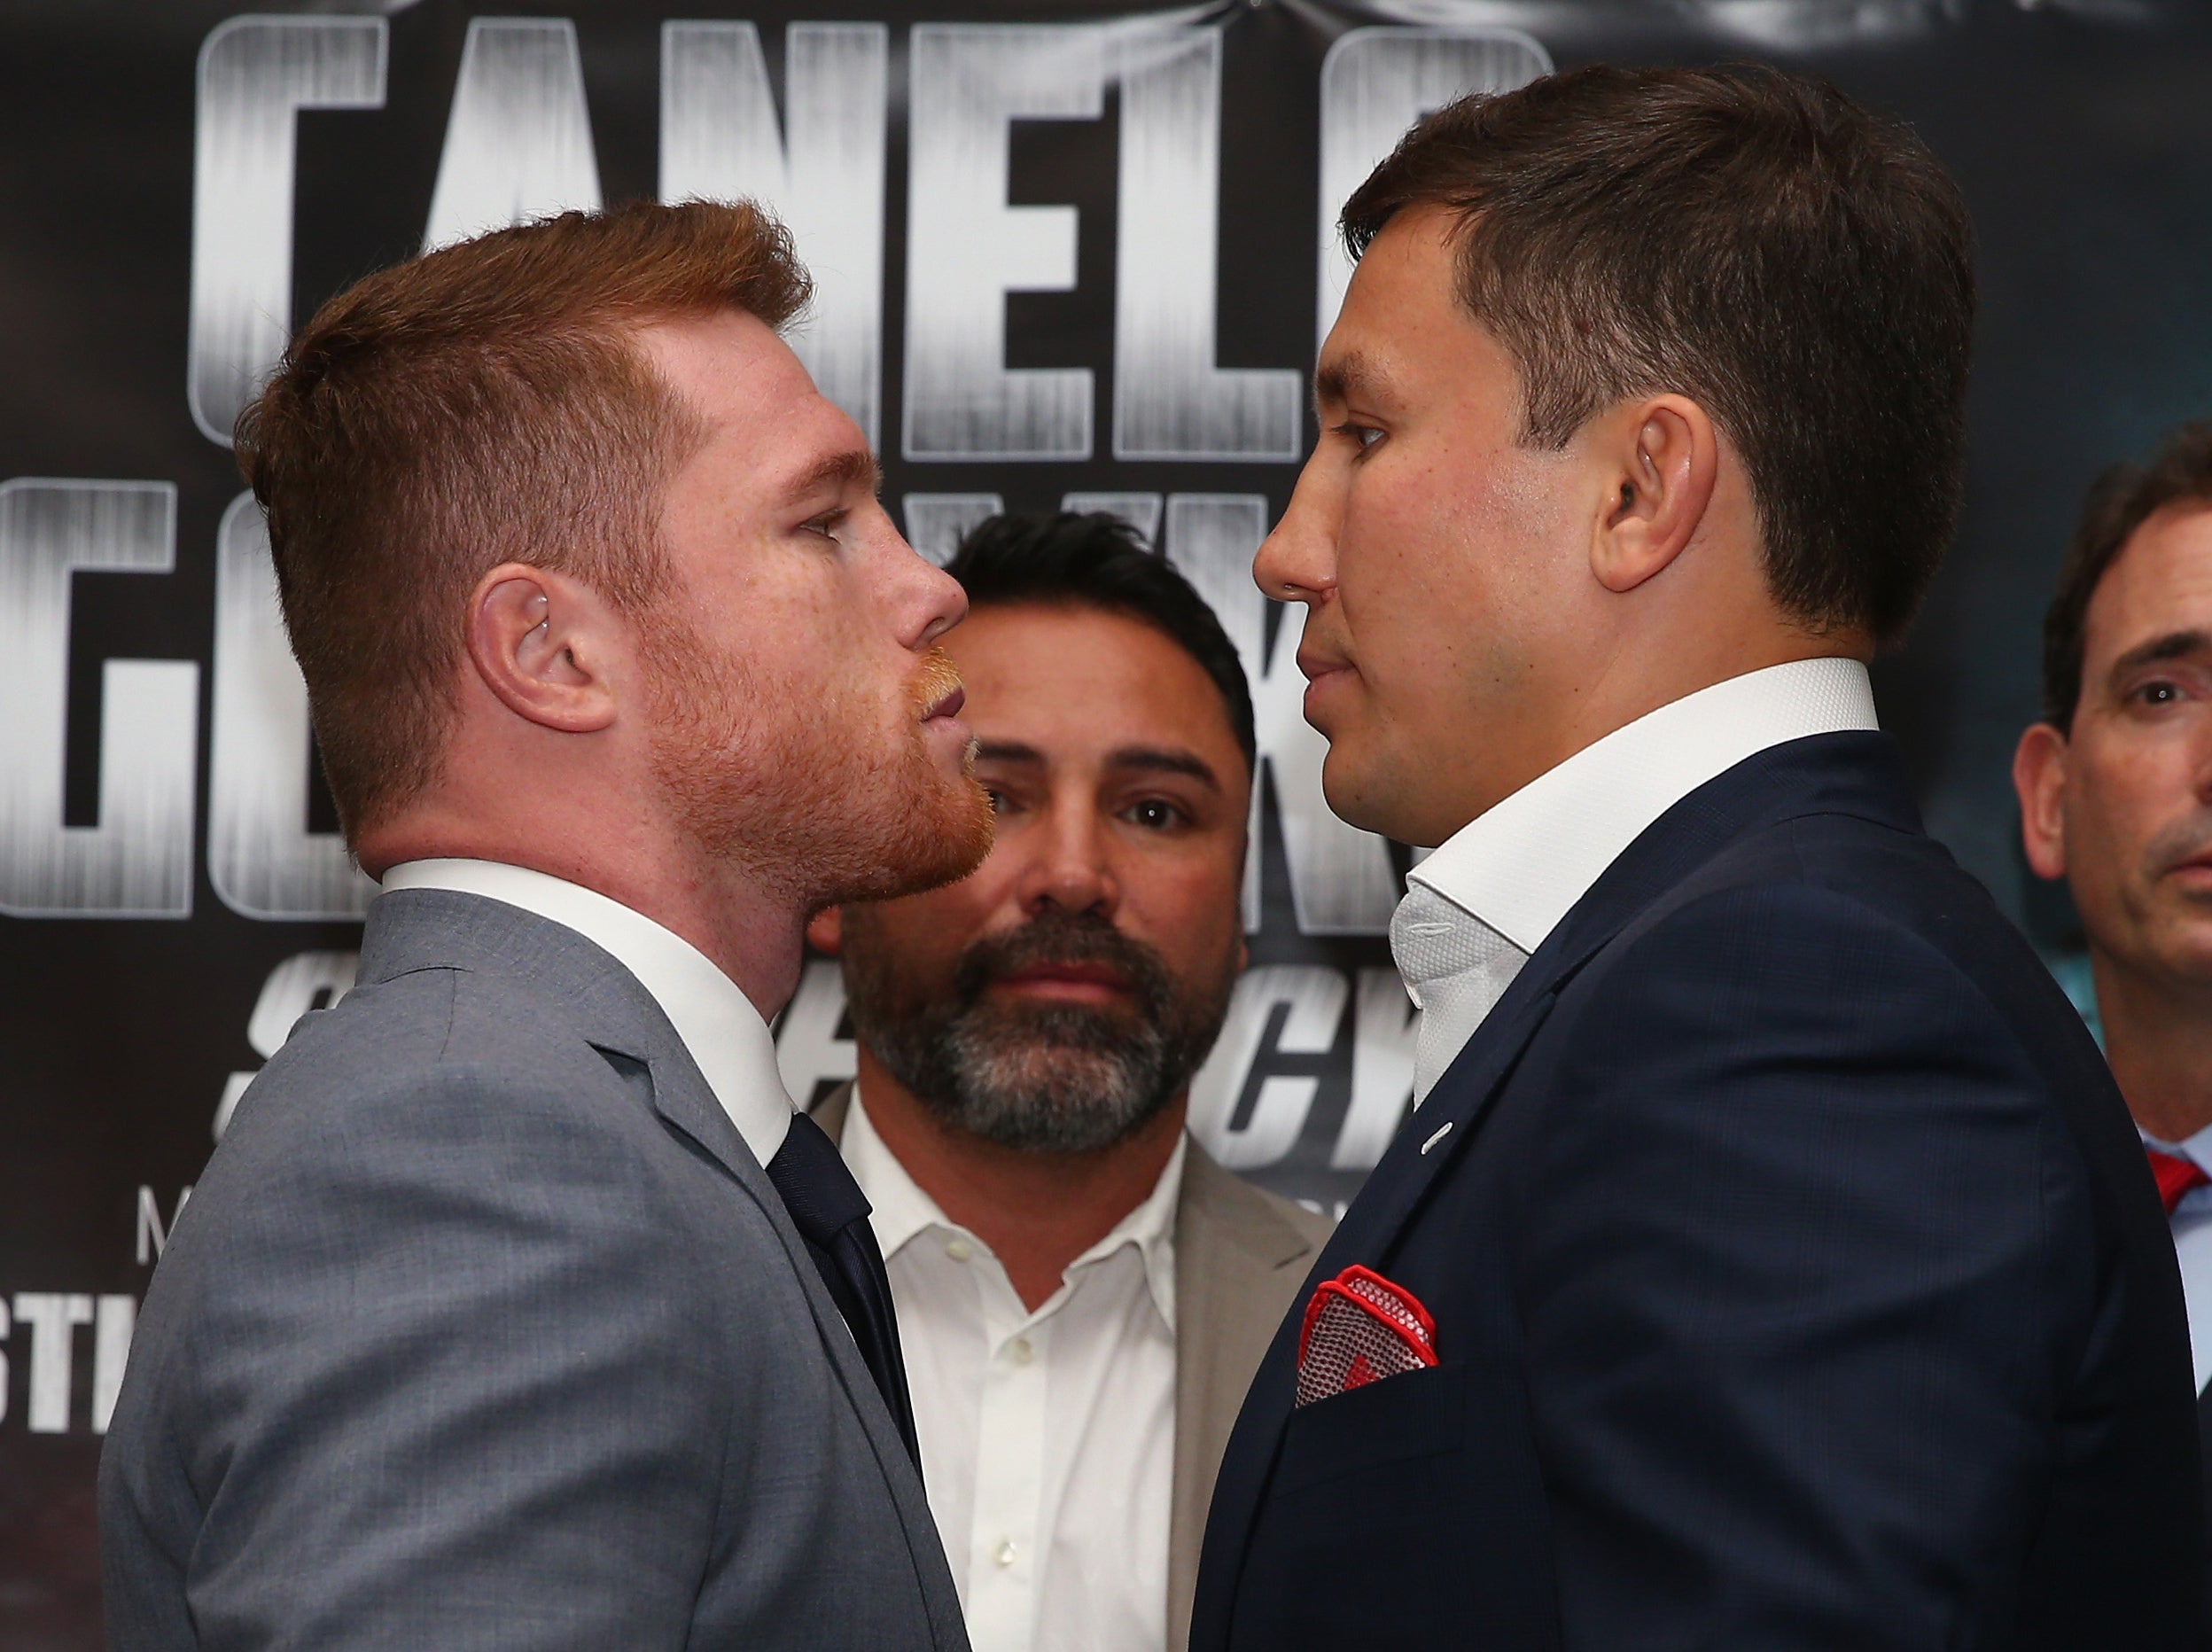 Canelo and Golovkin go head to head next month